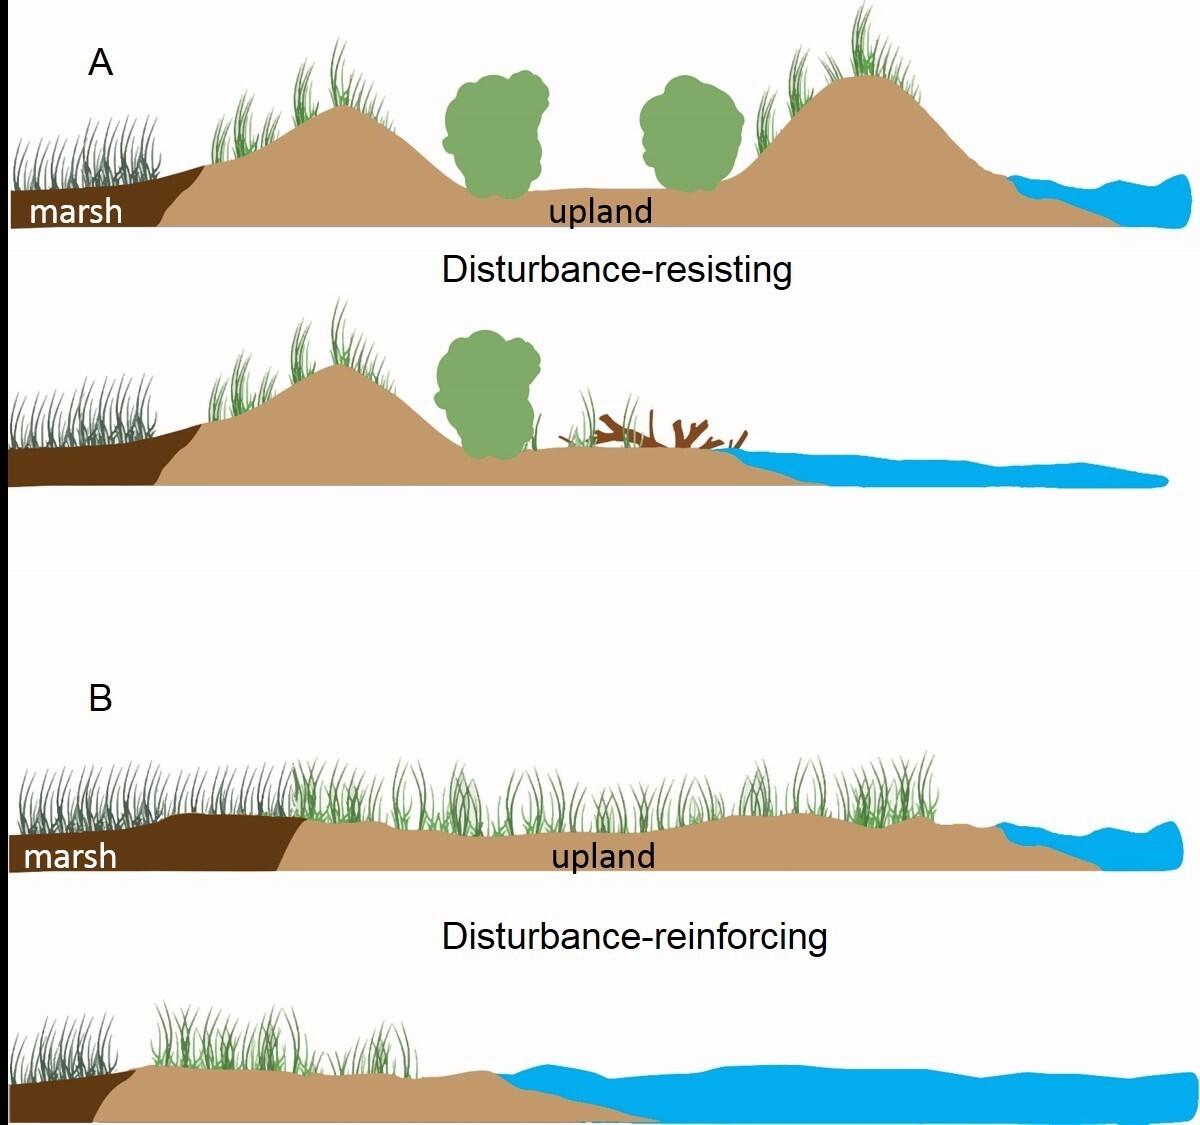 In response to sea-level rise, barrier islands tend to migrate landward via overwash in which sediment is deposited onto the backbarrier marsh. The researchers assessed the importance of interior upland vegetation on movement of the marsh-upland boundary in a transgressive barrier system. Over time, disturbance-resisting landscapes with greater topographic variability and vegetative cover resulted in higher rates of shoreline erosion and little to no transition marsh to upland (A). Disturbance-reinforcing landscapes have lower topographic relief, sparse vegetation and experienced higher rates of marsh to upland conversion (B).